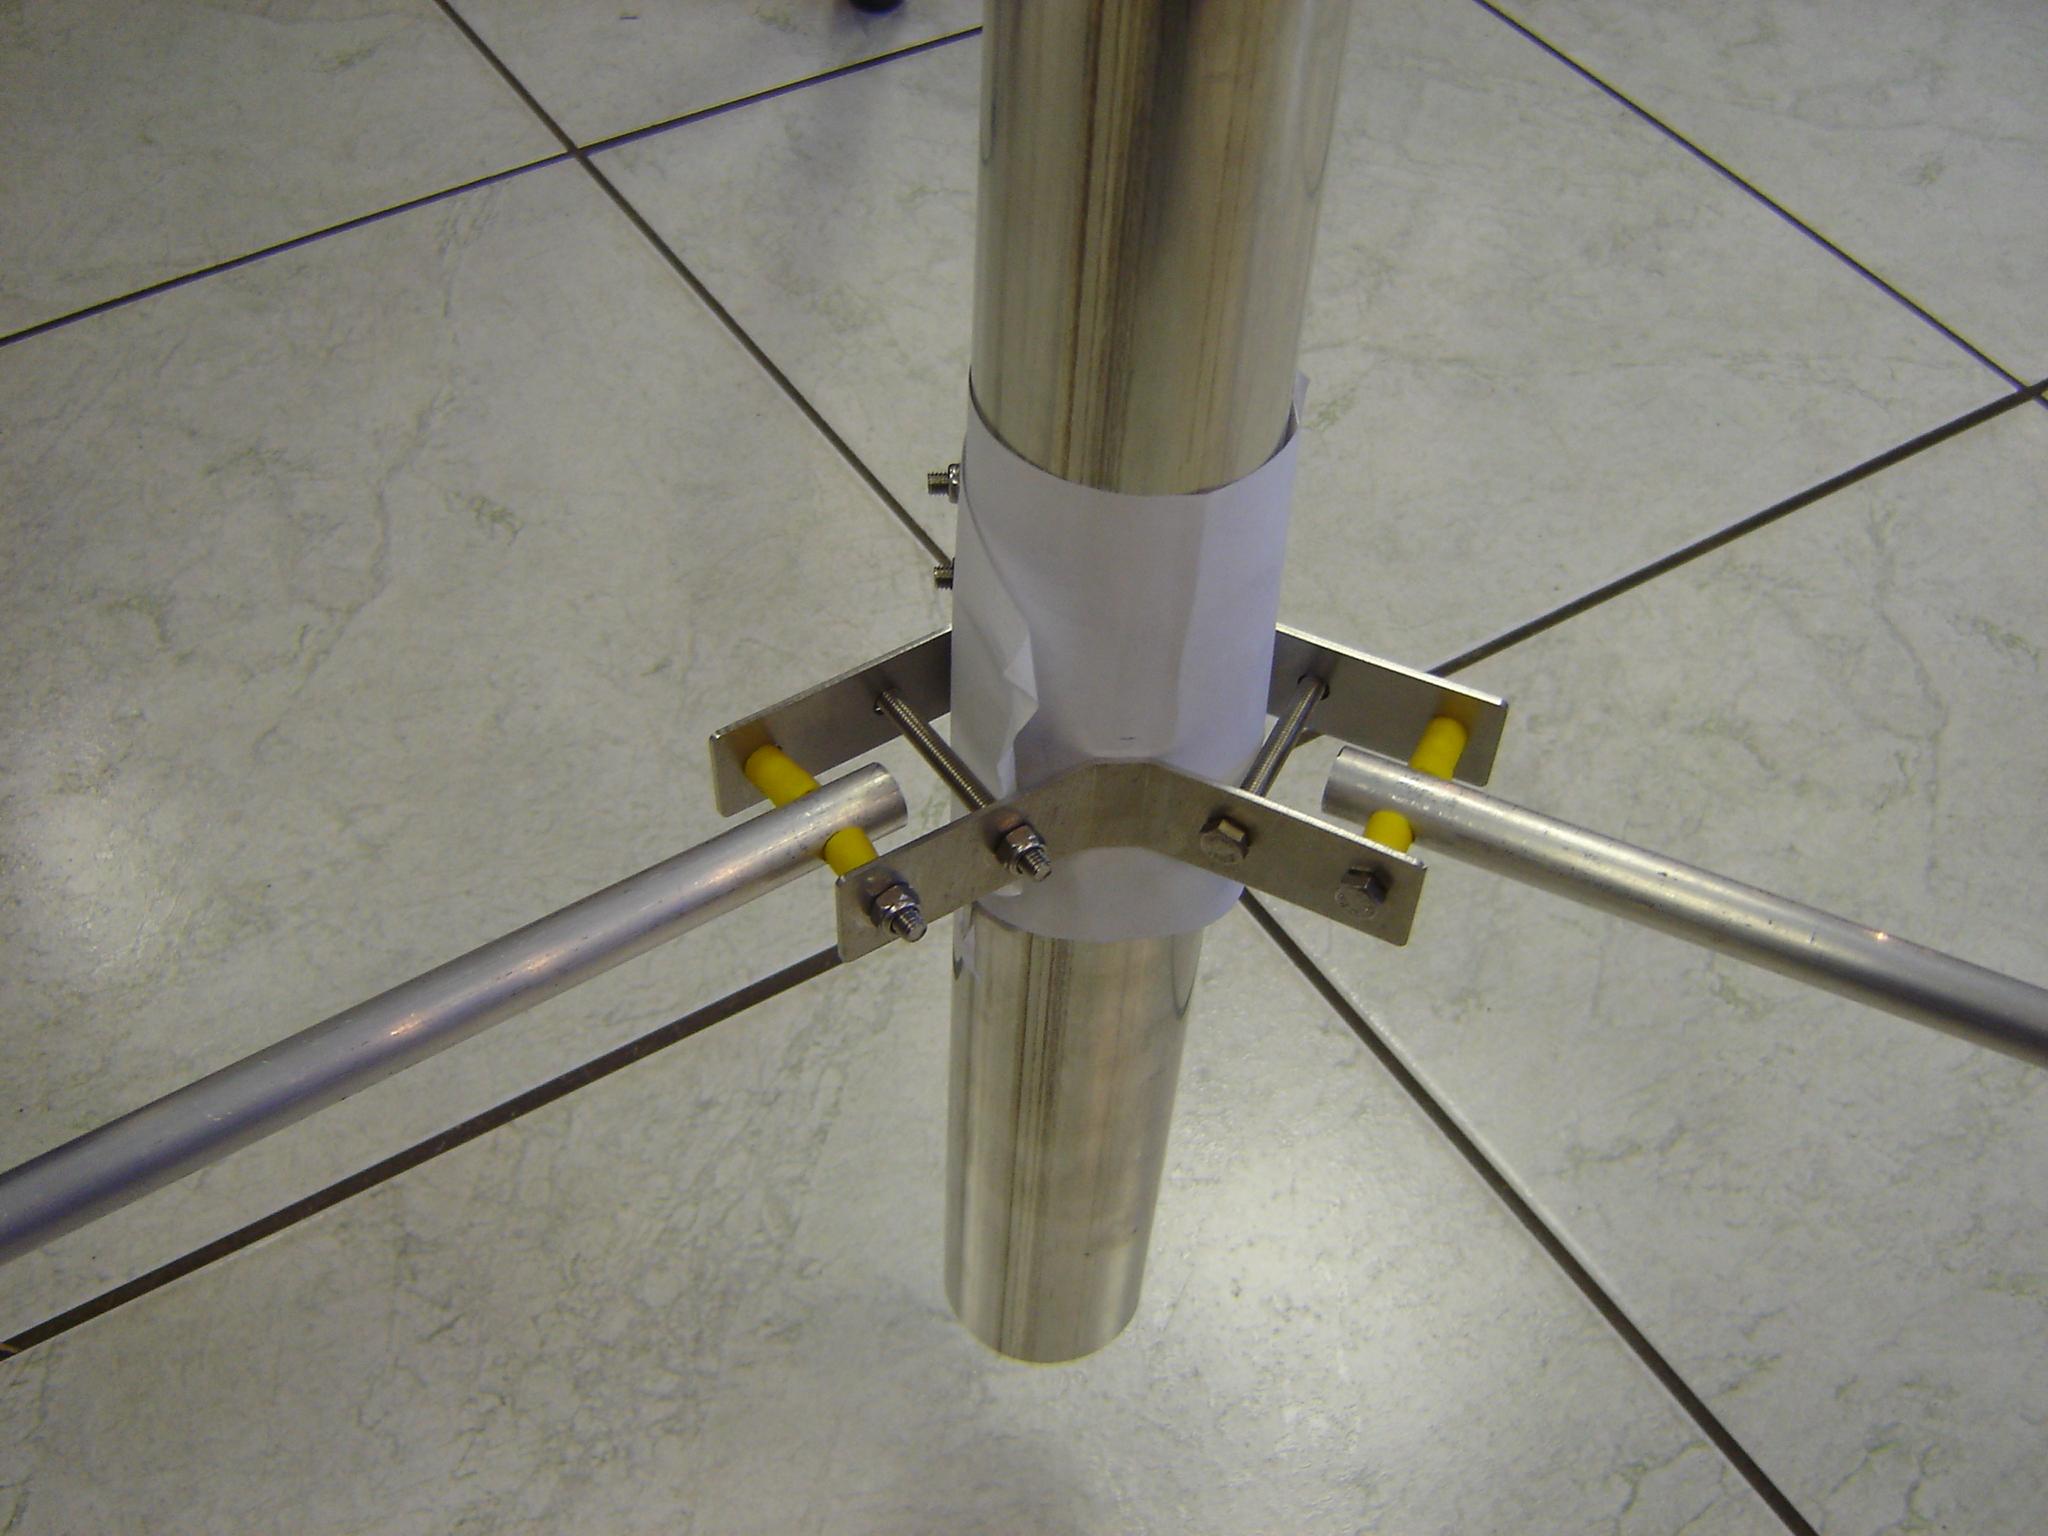 Mast Tripod. Designed to work with masts with a 2 inch bore1